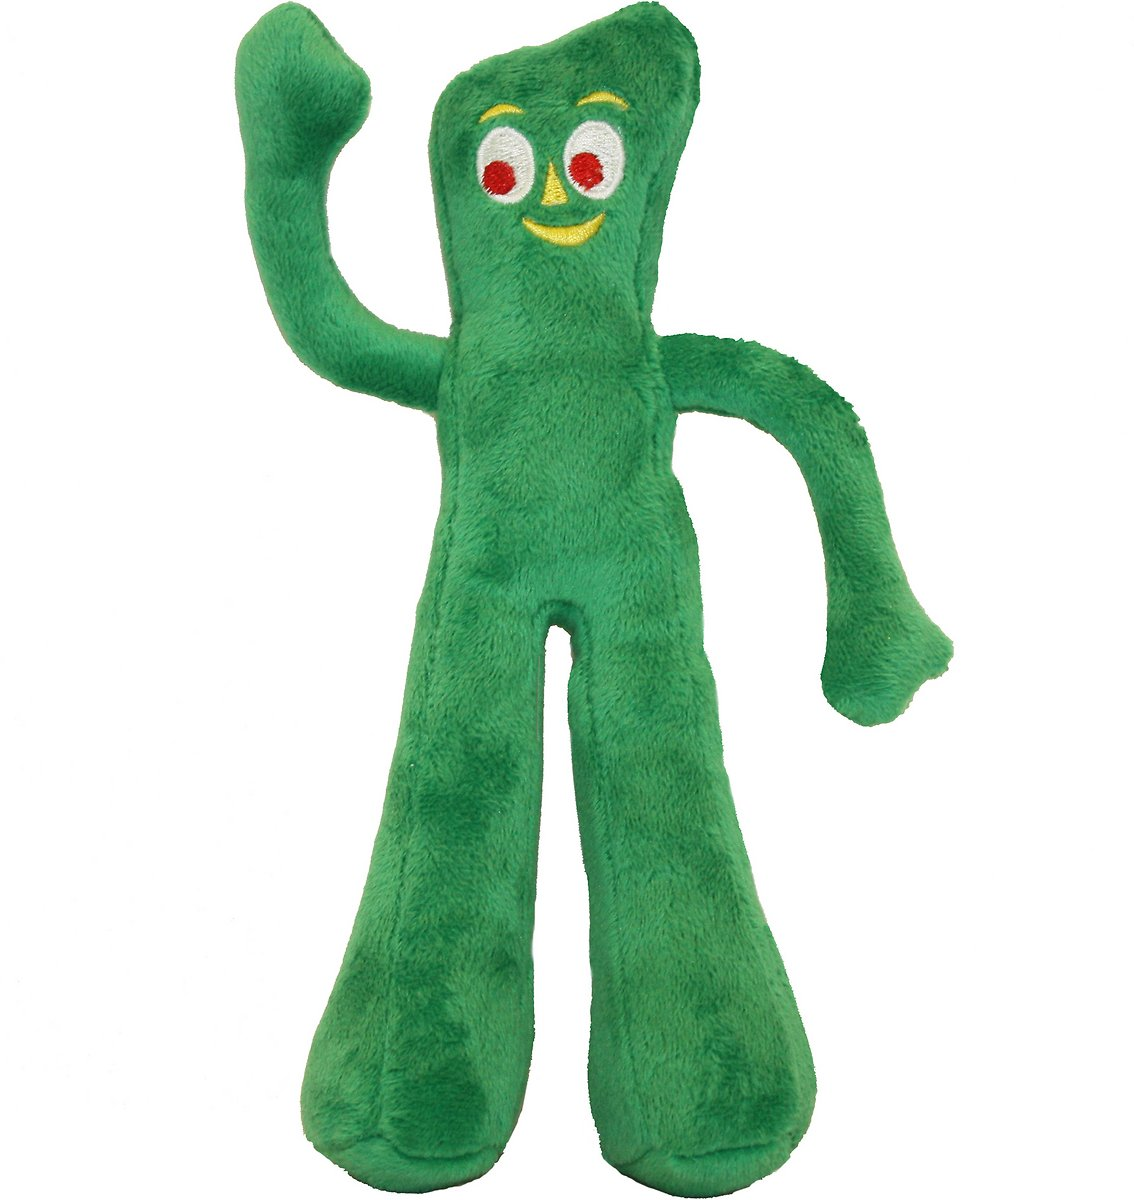 Multipets’ Gumby Squeaky Toy